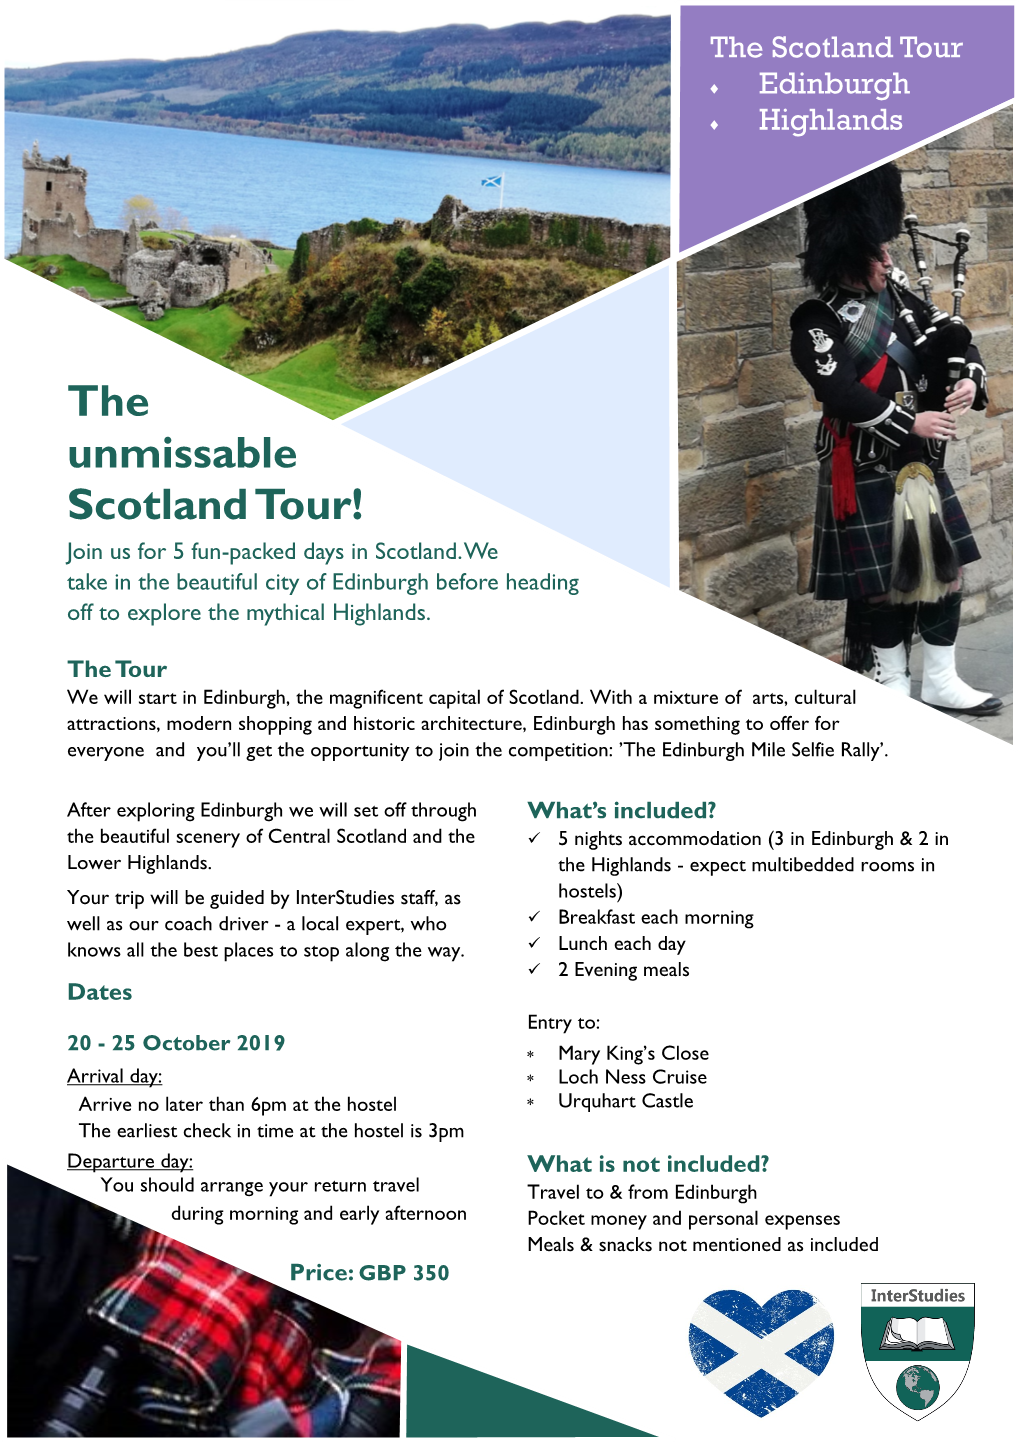 The Unmissable Scotland Tour! Join Us for 5 Fun-Packed Days in Scotland